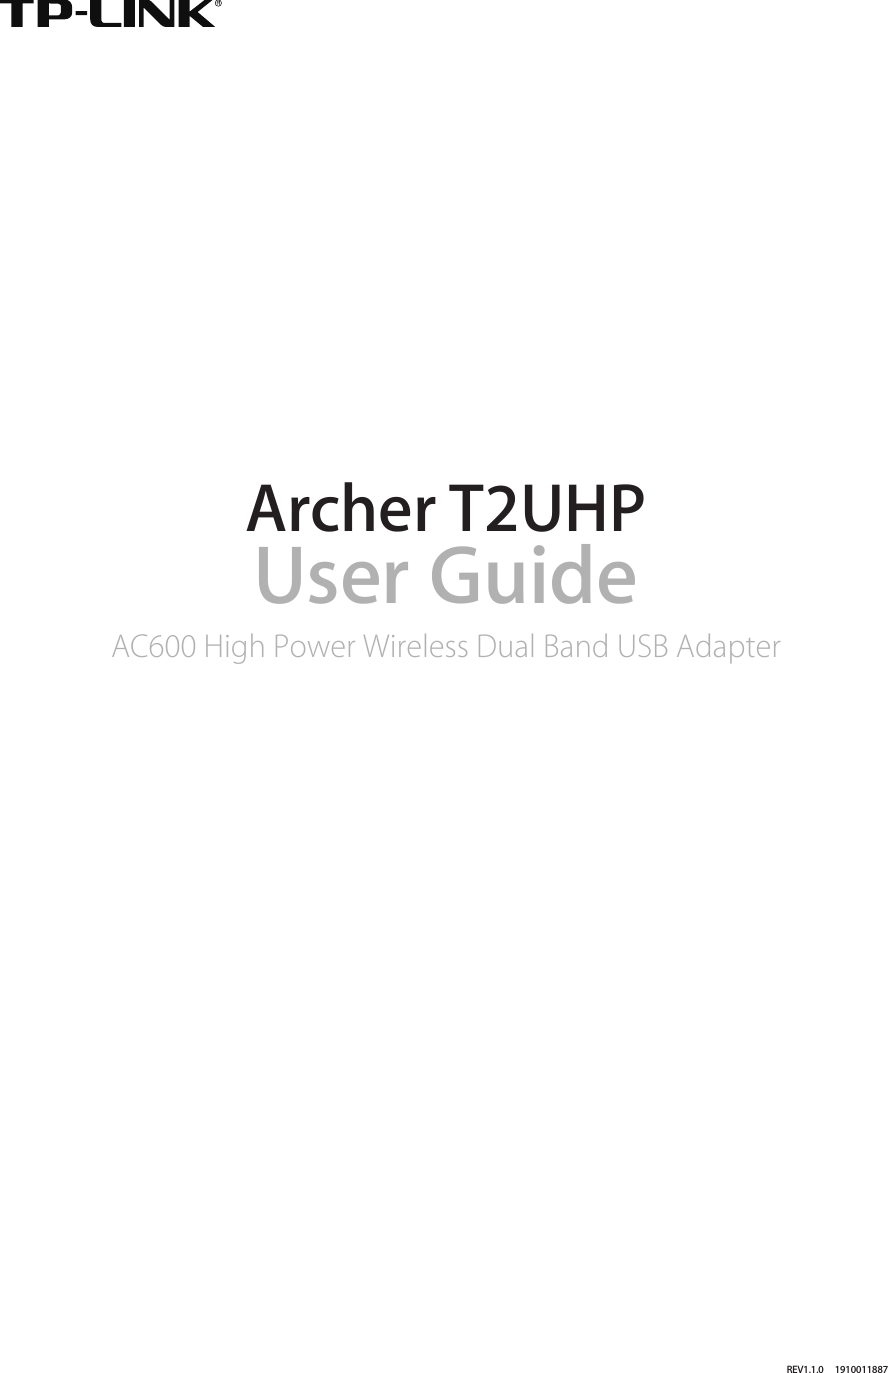 REV1.1.0     1910011887Archer T2UHPUser GuideAC600 High Power Wireless Dual Band USB Adapter